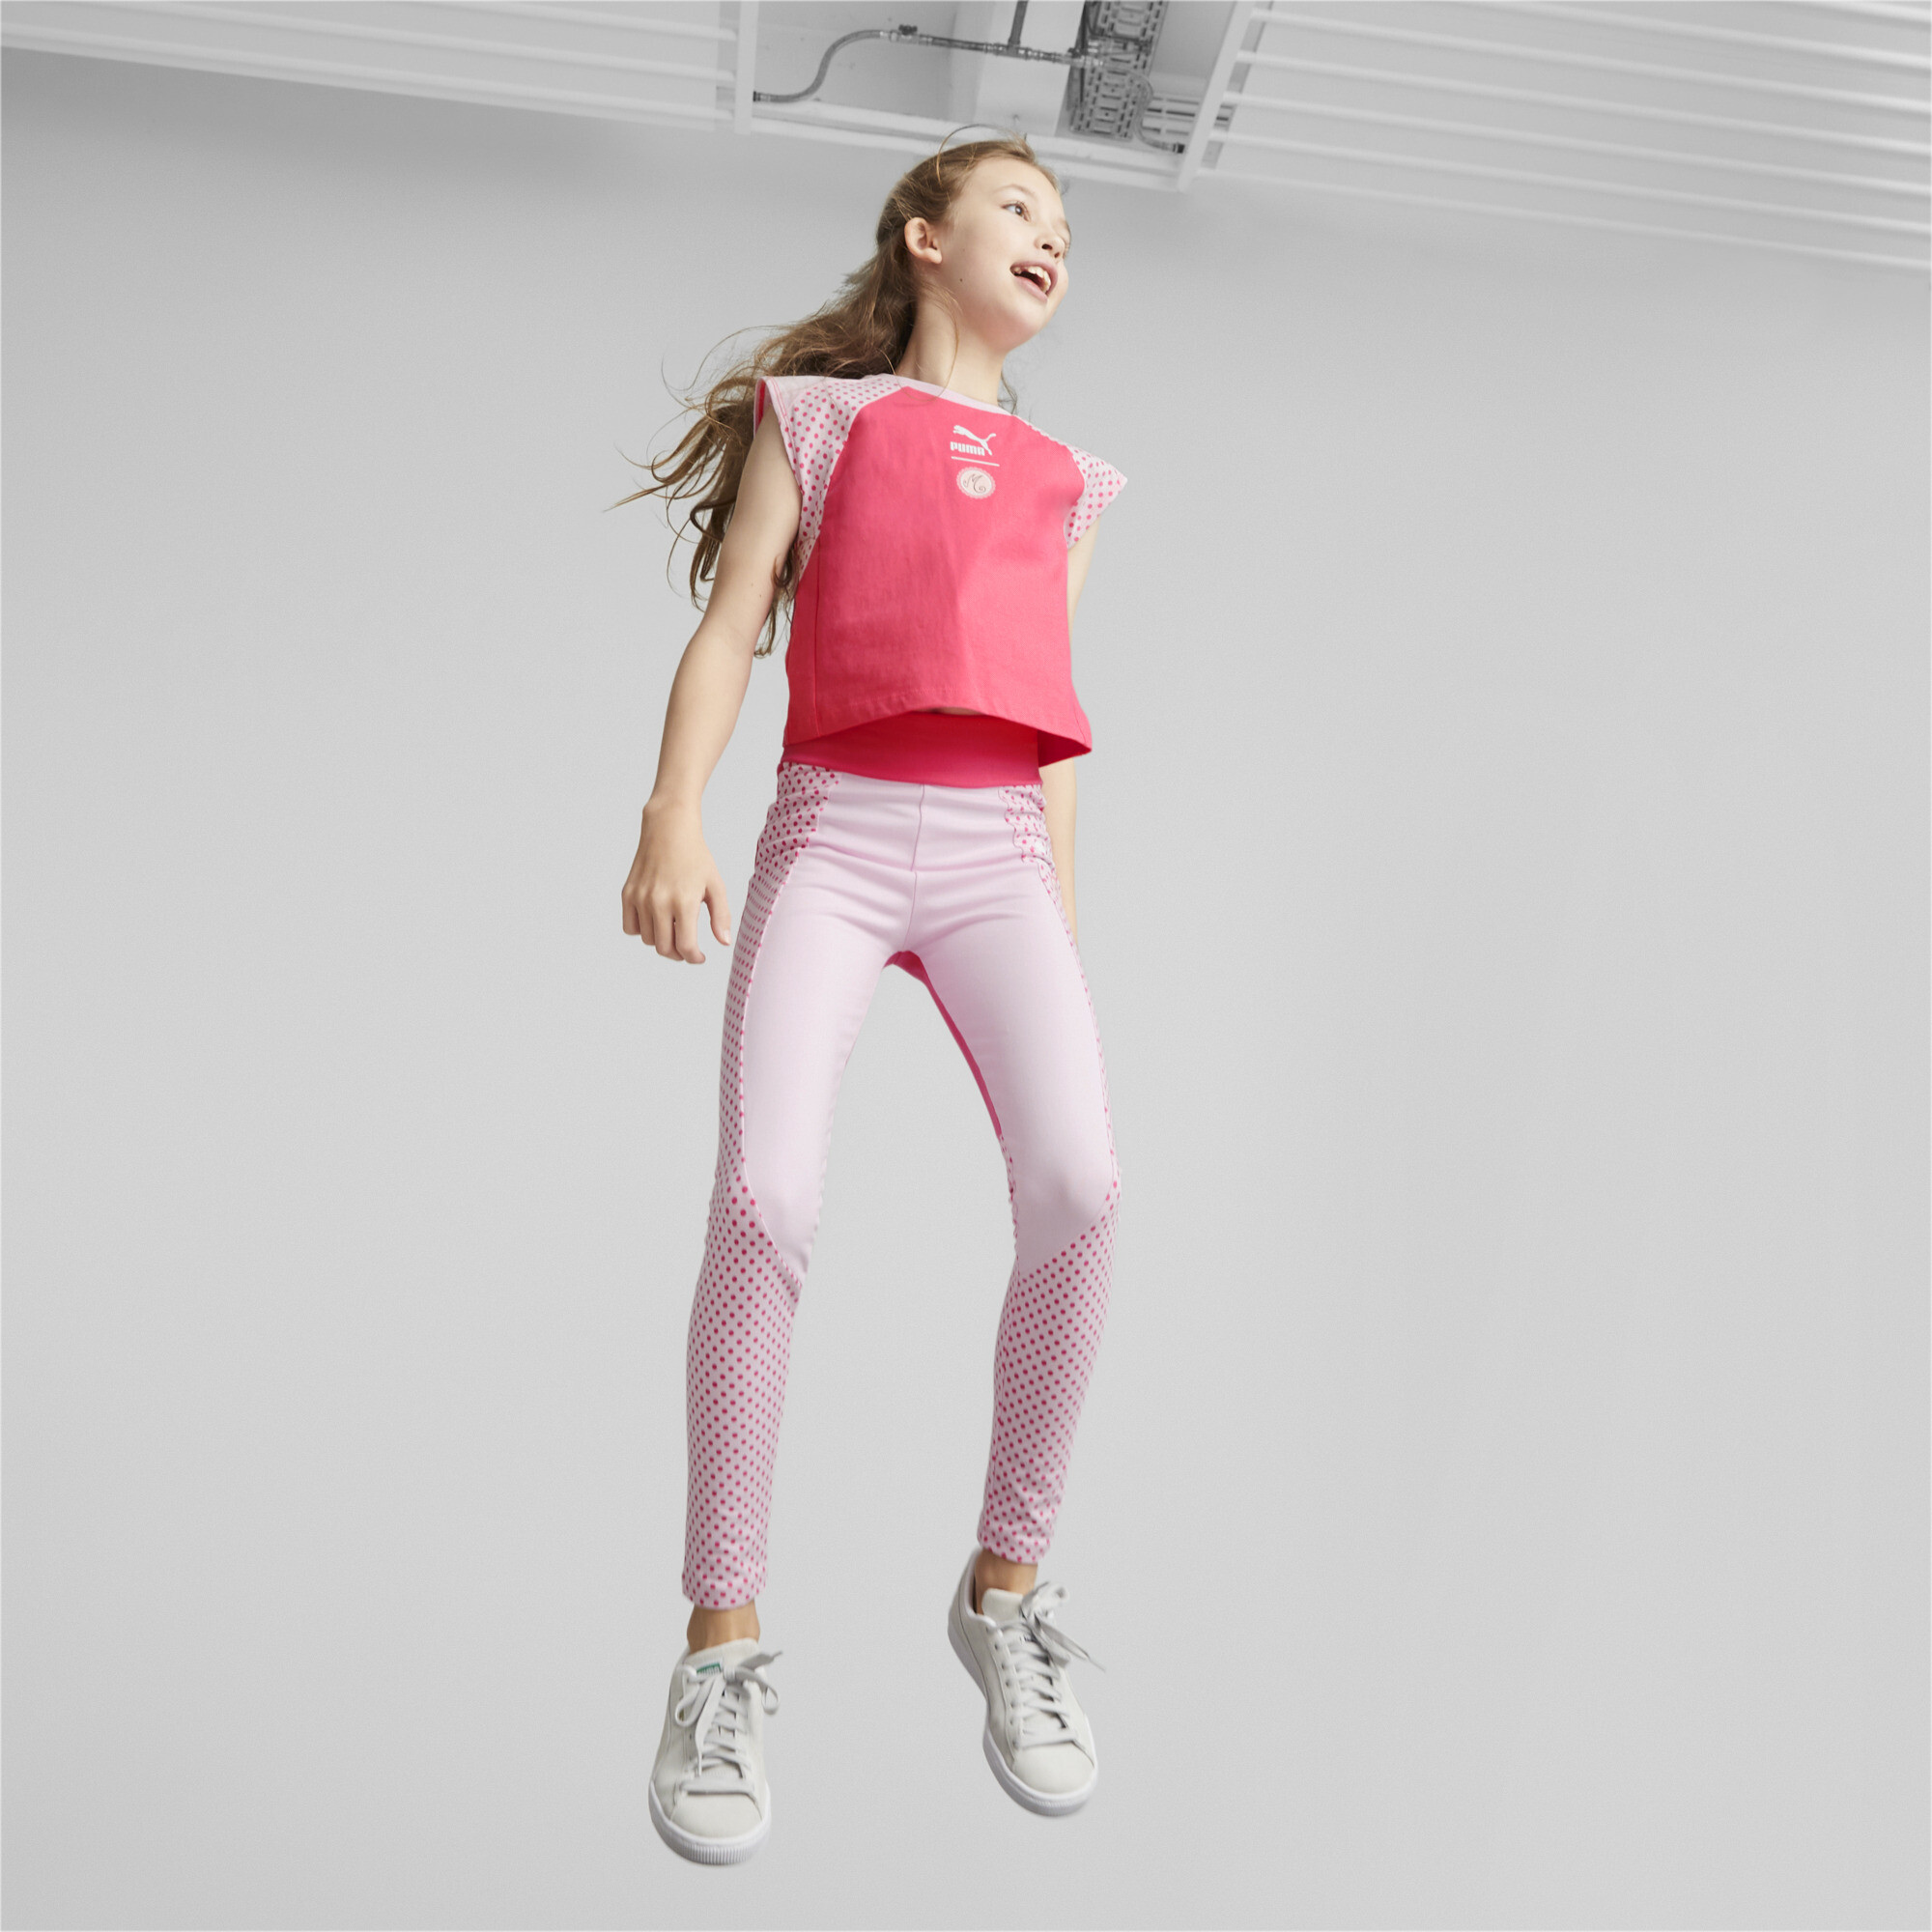 PUMA X MIRACULOUS Leggings In Pink, Size 11-12 Youth